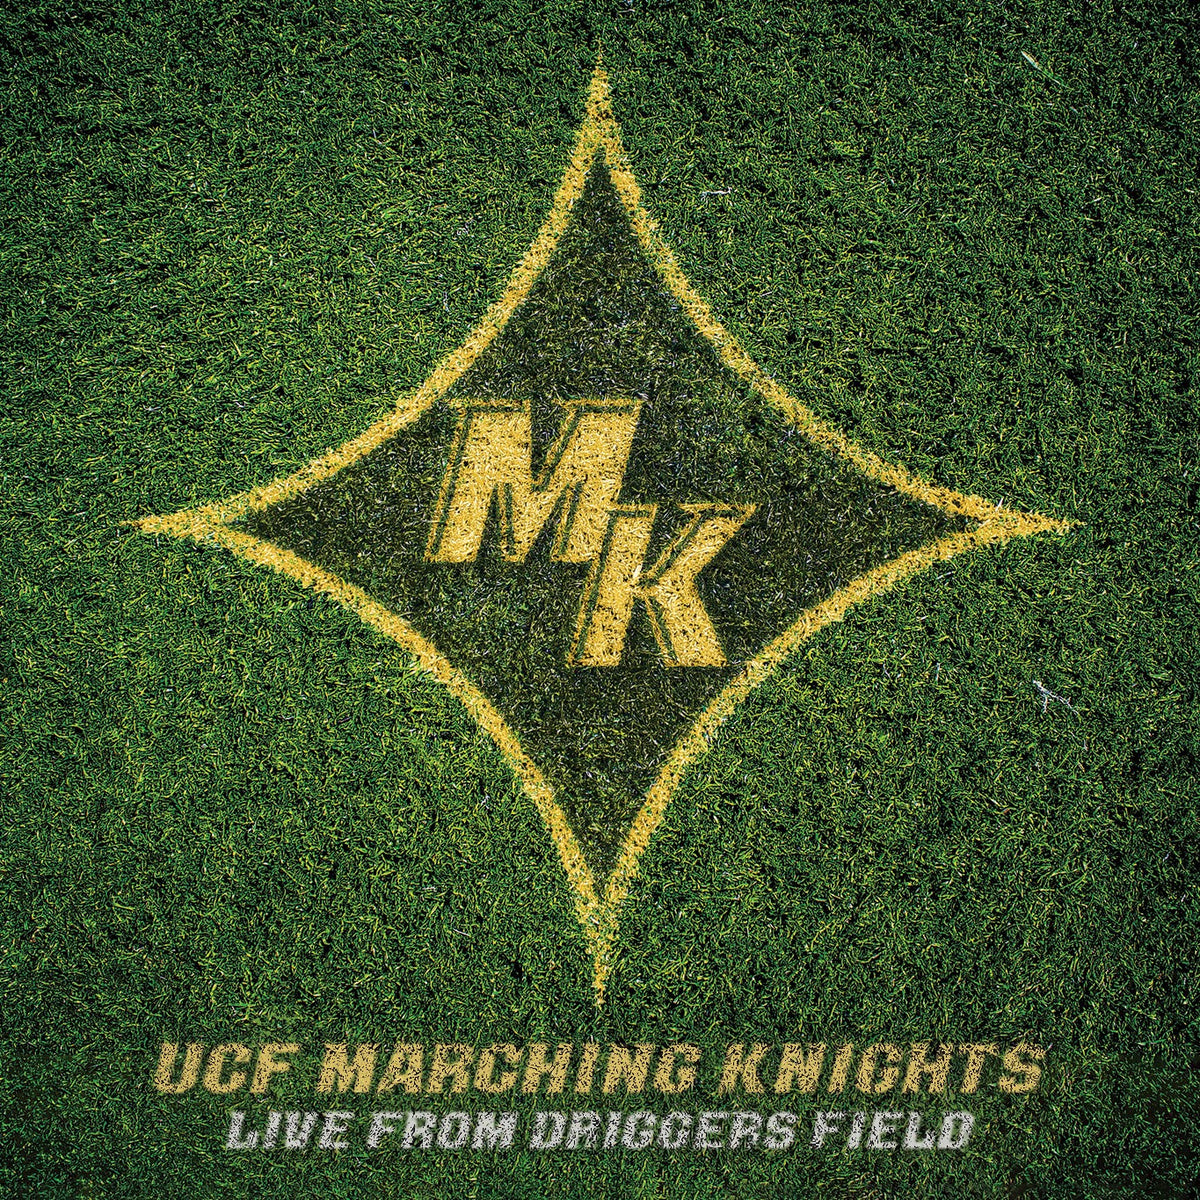 UCF Marching Knights (Live from Driggers Field) CD UCF